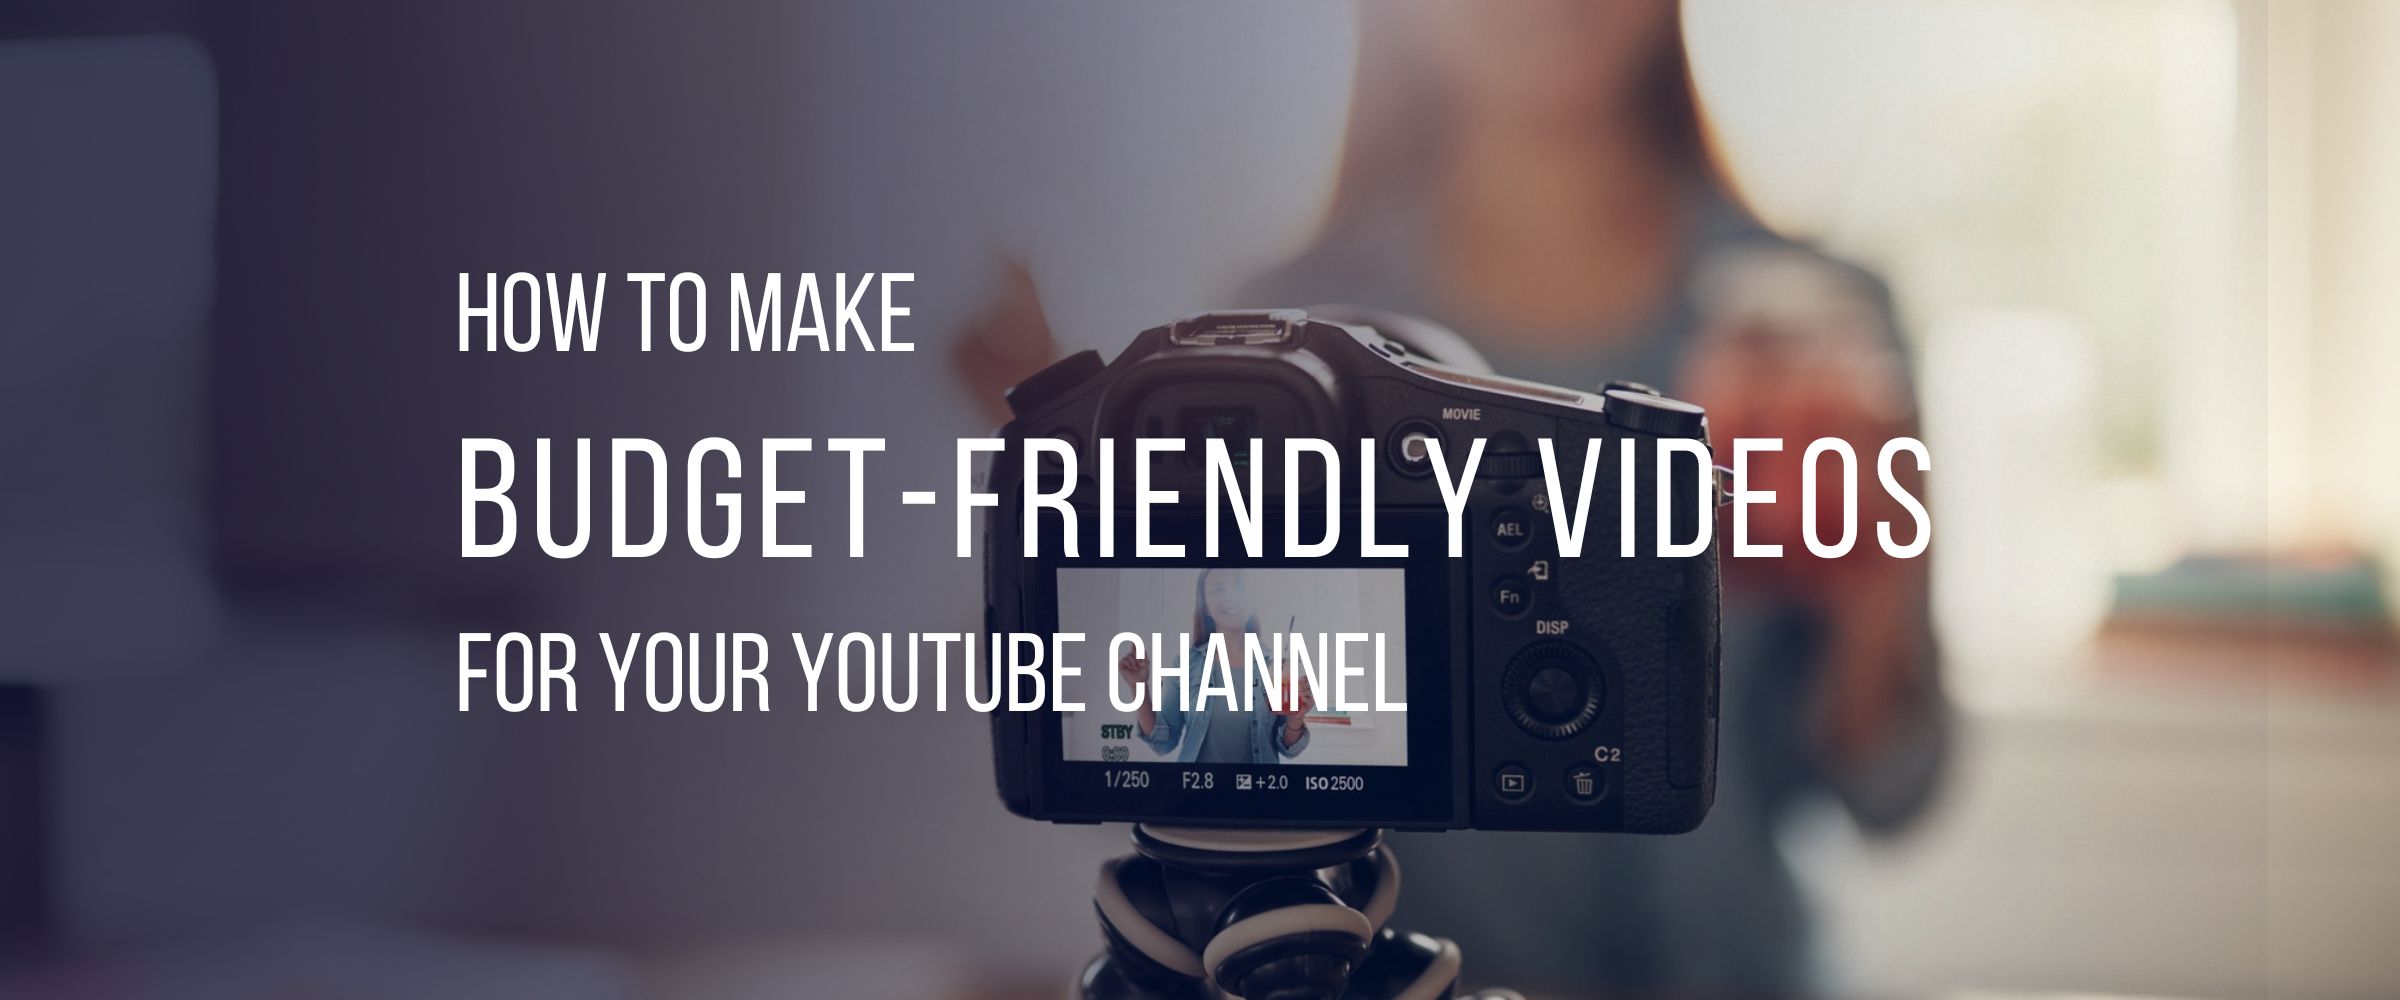 How to Make Budget-friendly Videos for your YouTube Channel